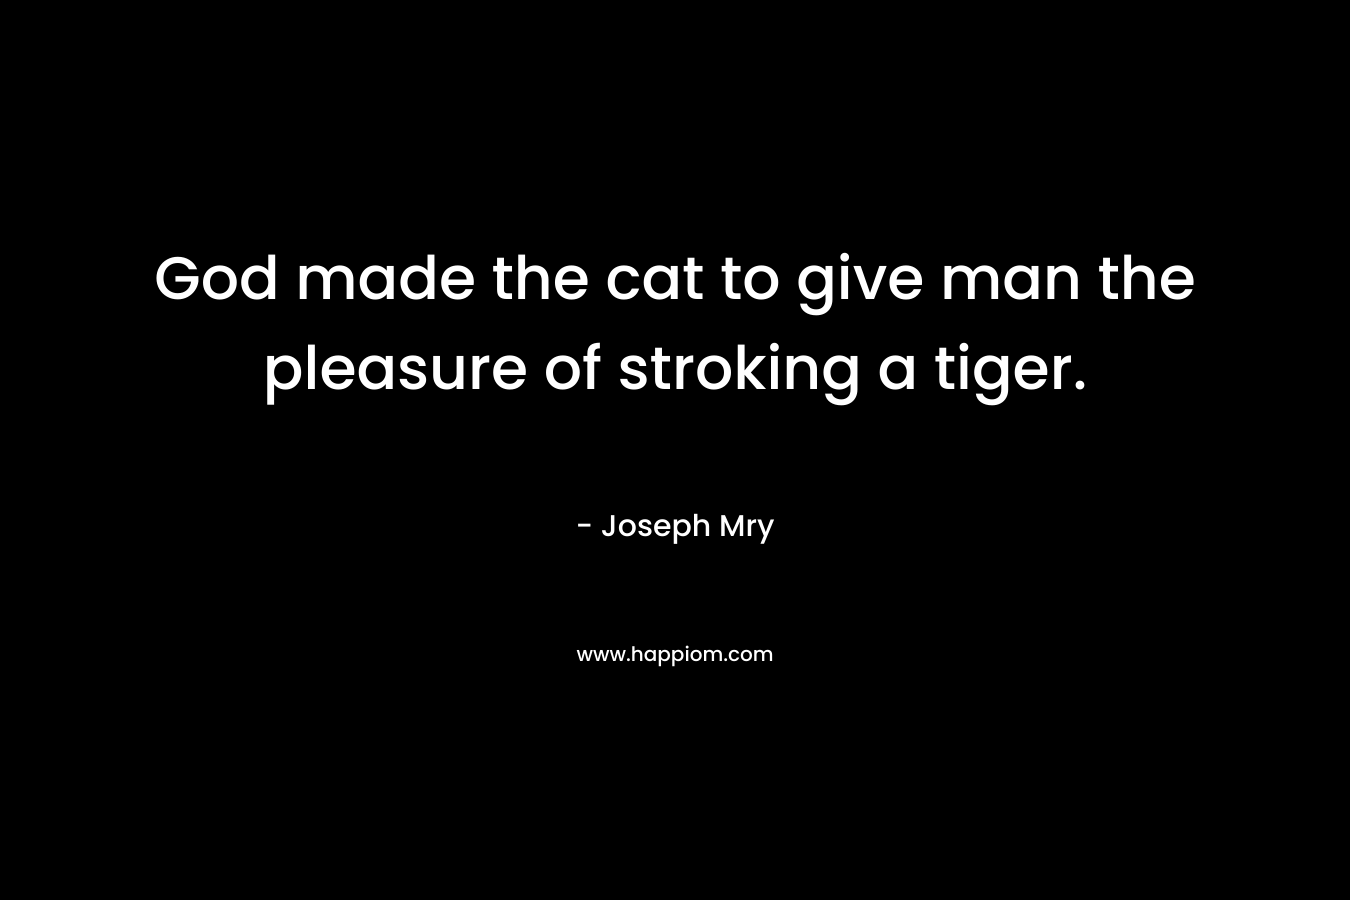 God made the cat to give man the pleasure of stroking a tiger. – Joseph Mry